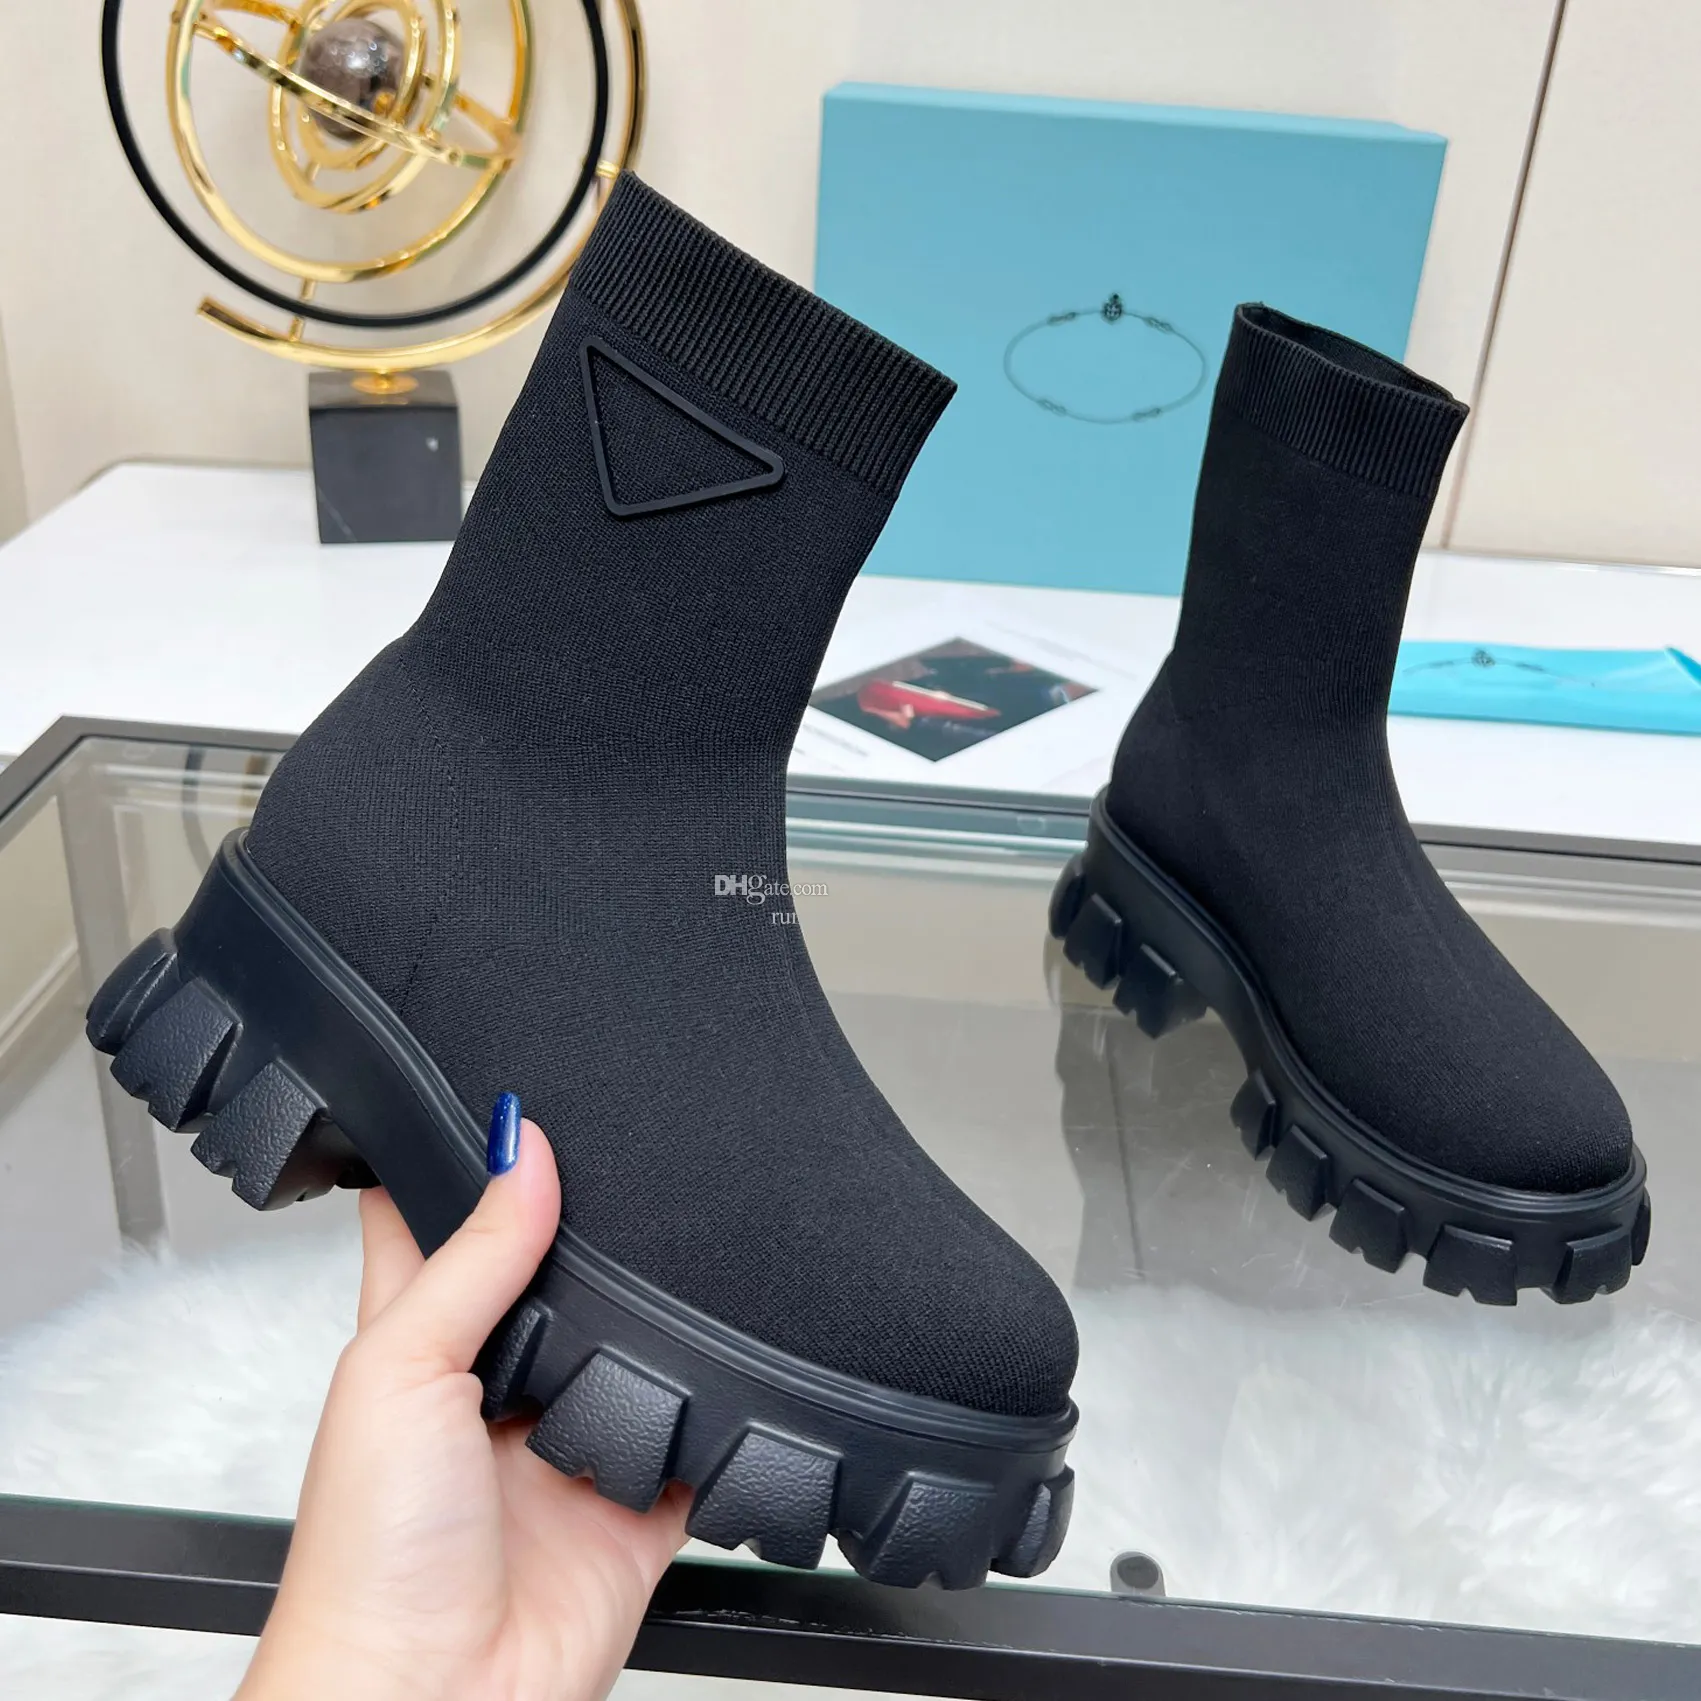 New Designer Knit Socks Shoes Classic trainer Casual Shoes luxury Women Black white Blue runners sneakers fashion socks boots Knit shoes With box size 35-41